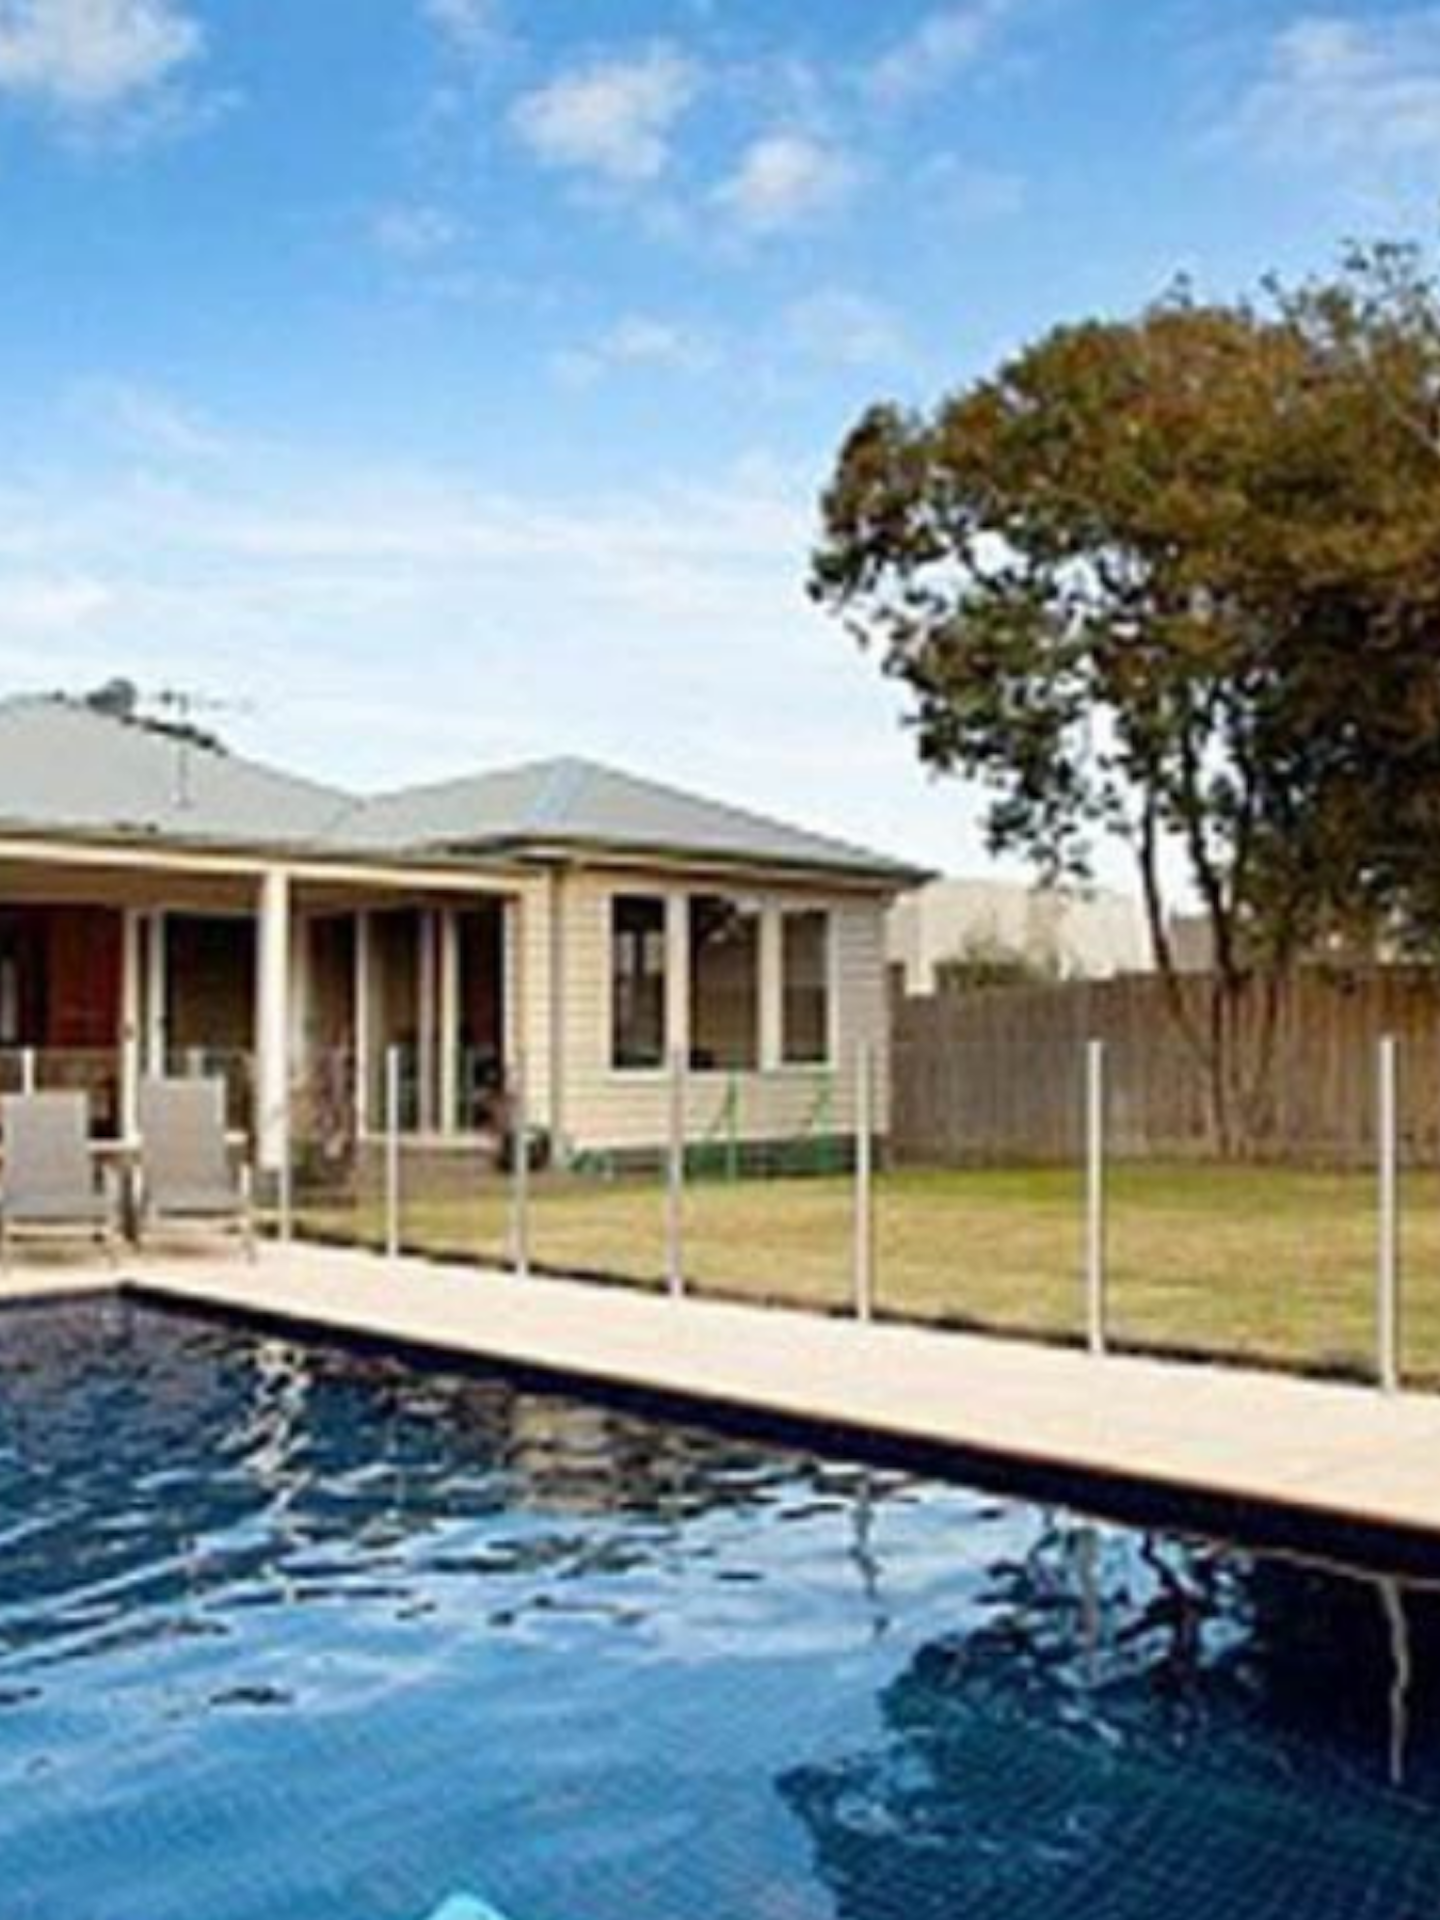 inground pool with holiday home in background